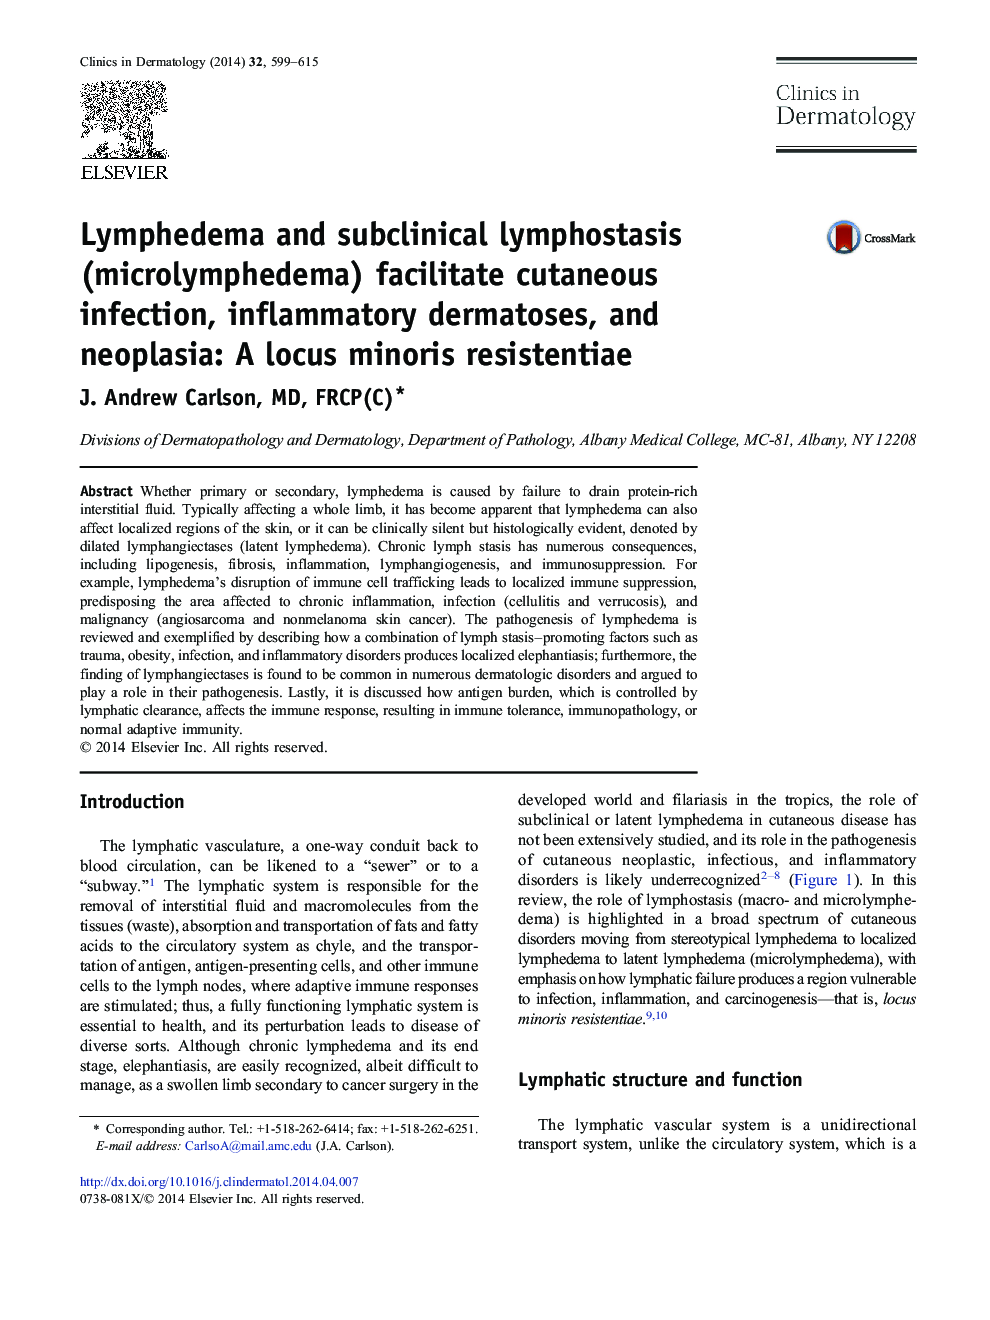 Lymphedema and subclinical lymphostasis (microlymphedema) facilitate cutaneous infection, inflammatory dermatoses, and neoplasia: A locus minoris resistentiae